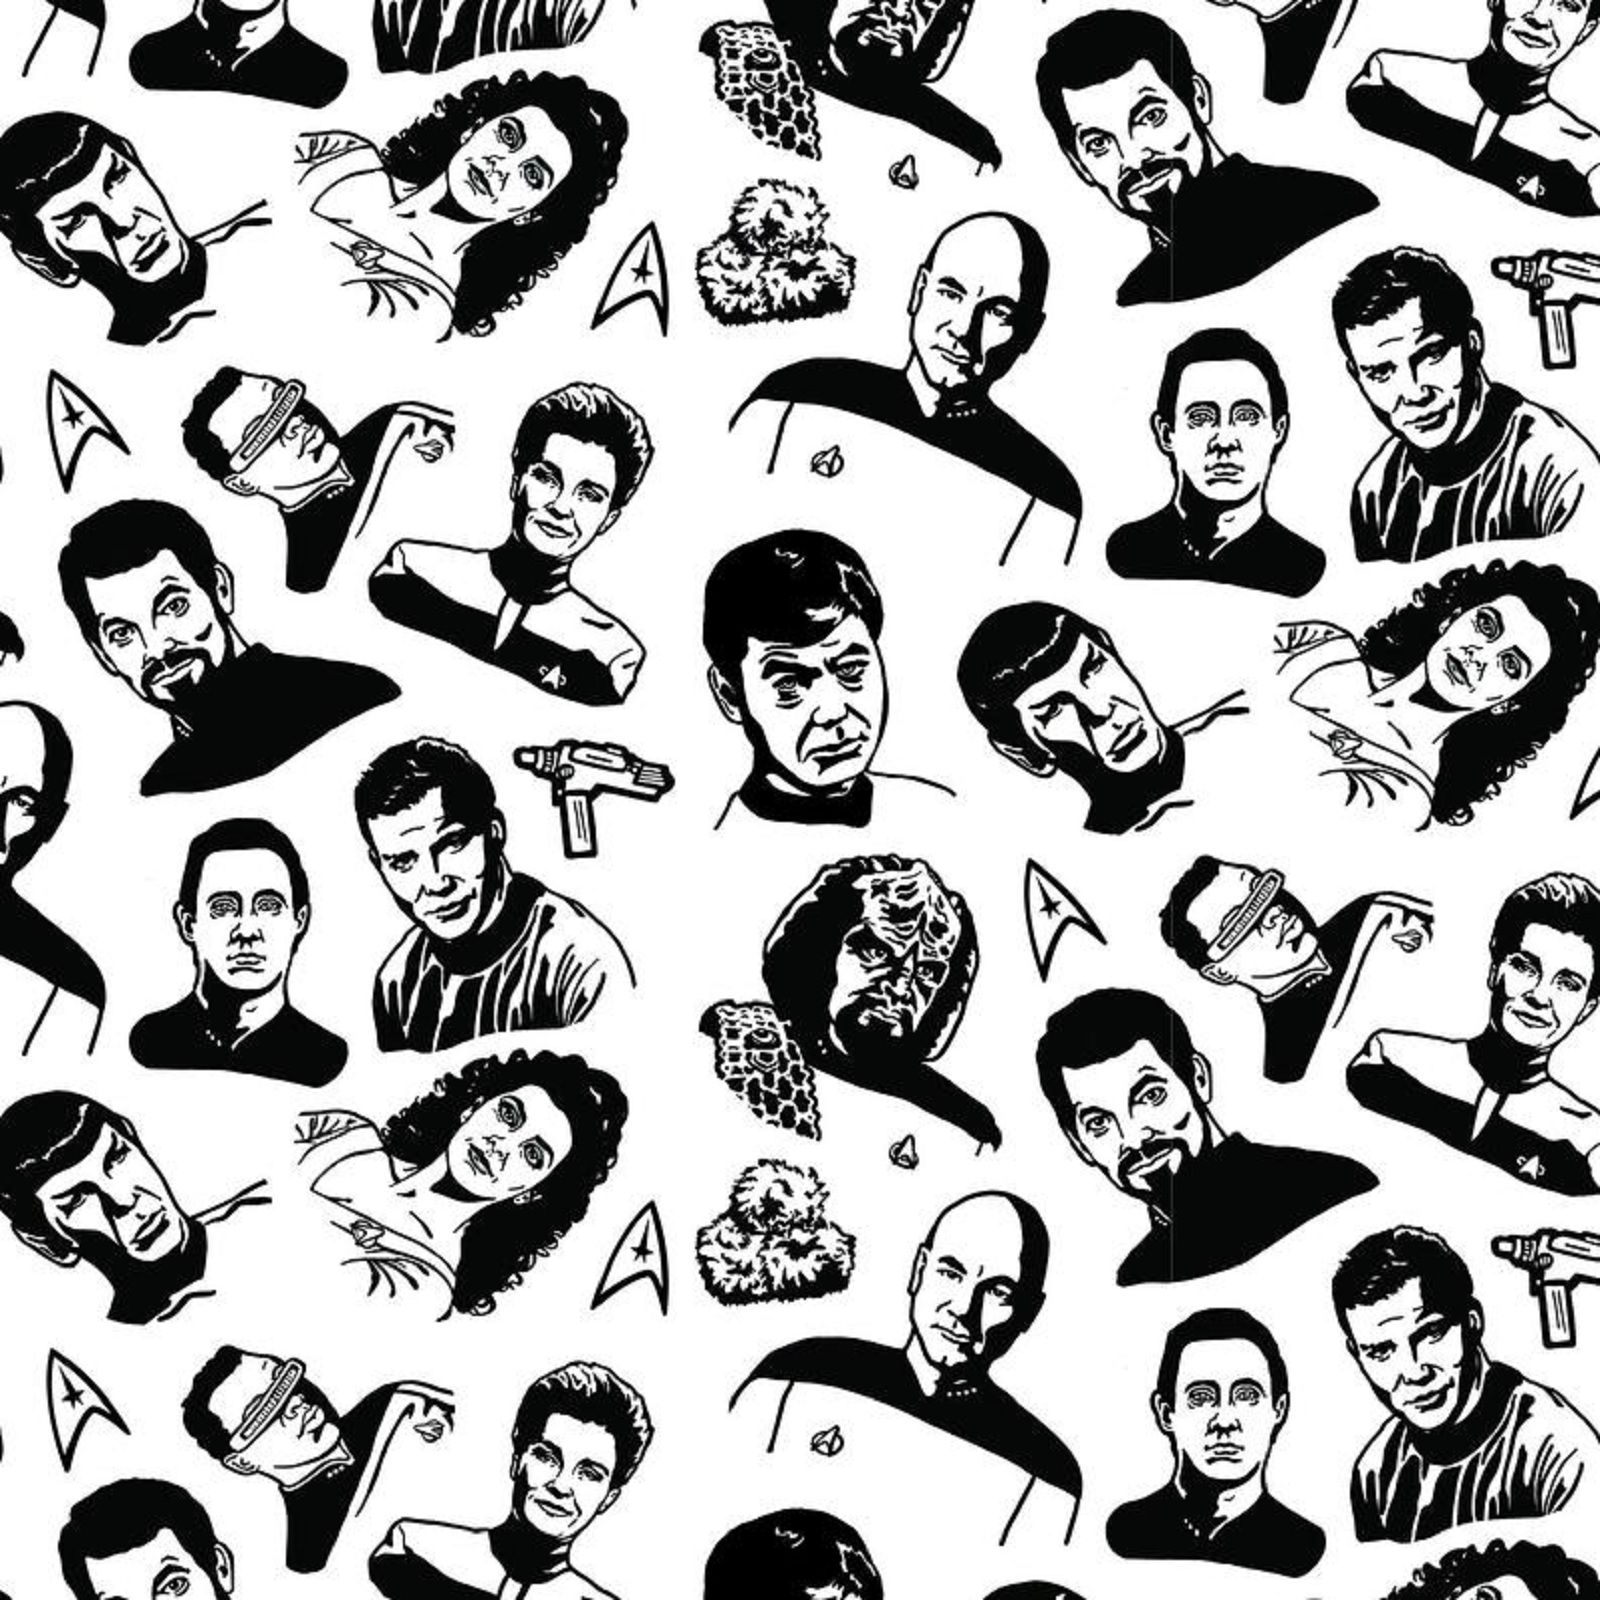 34 Geeky Wrapping Papers To Use On Christmas Gifts This Year image 31